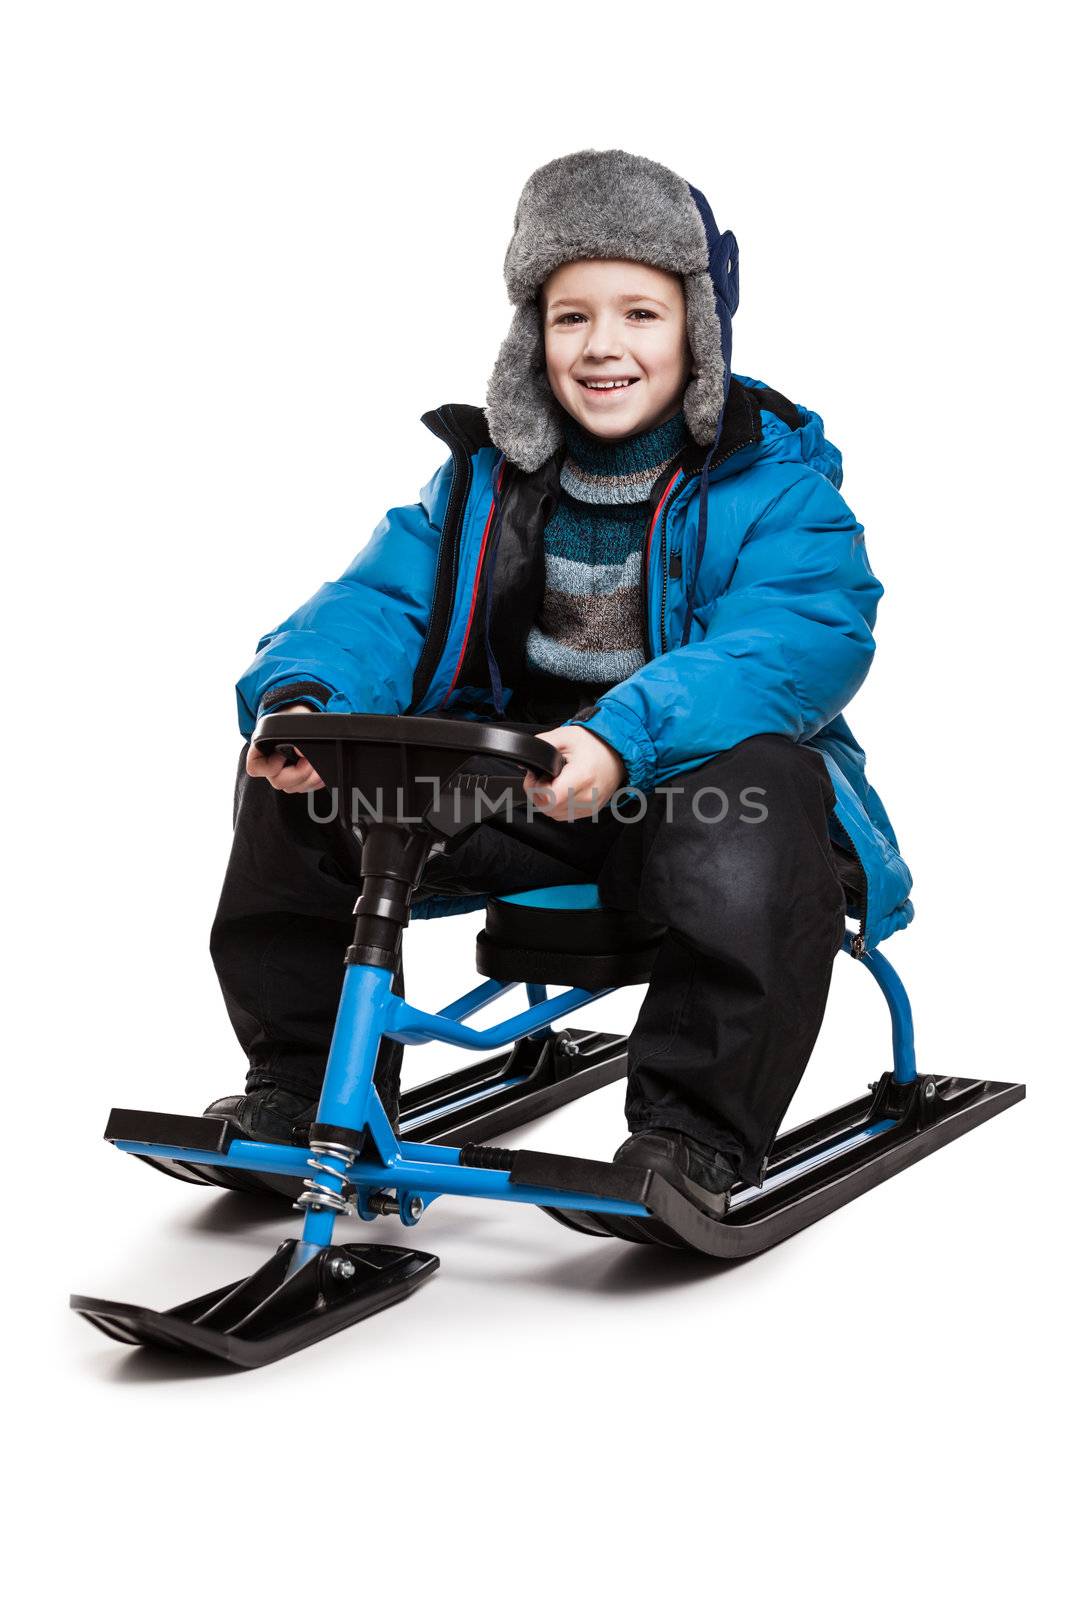 Child on snow scooter or snowmobile toy by ia_64